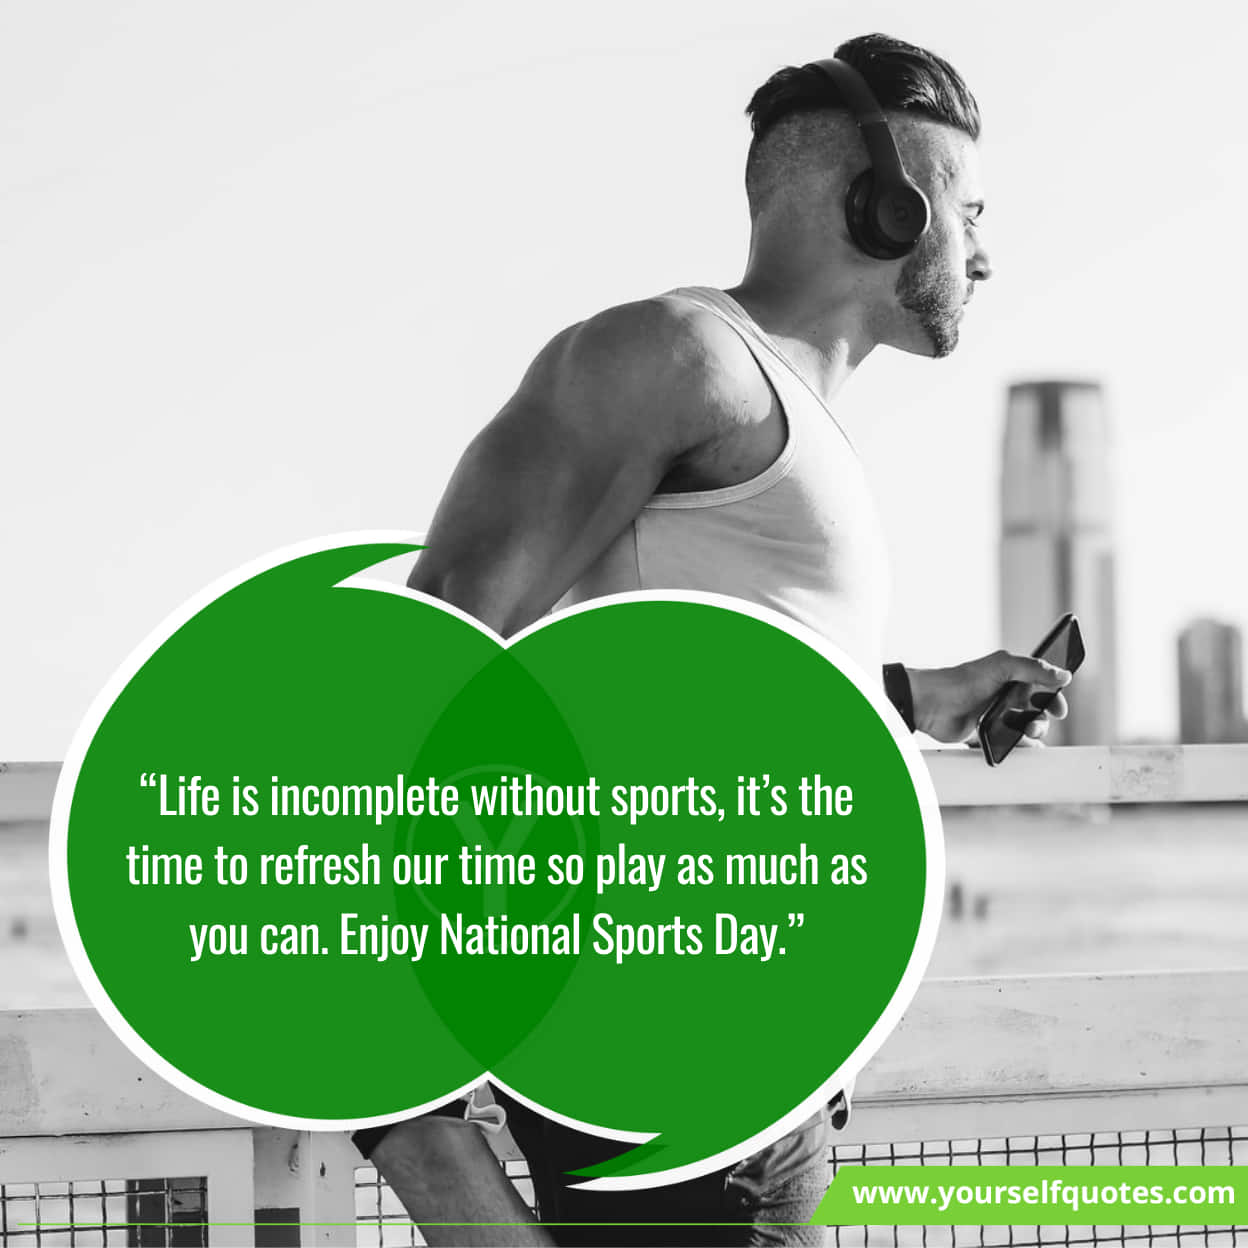 National Sports Day Messages & Slogans